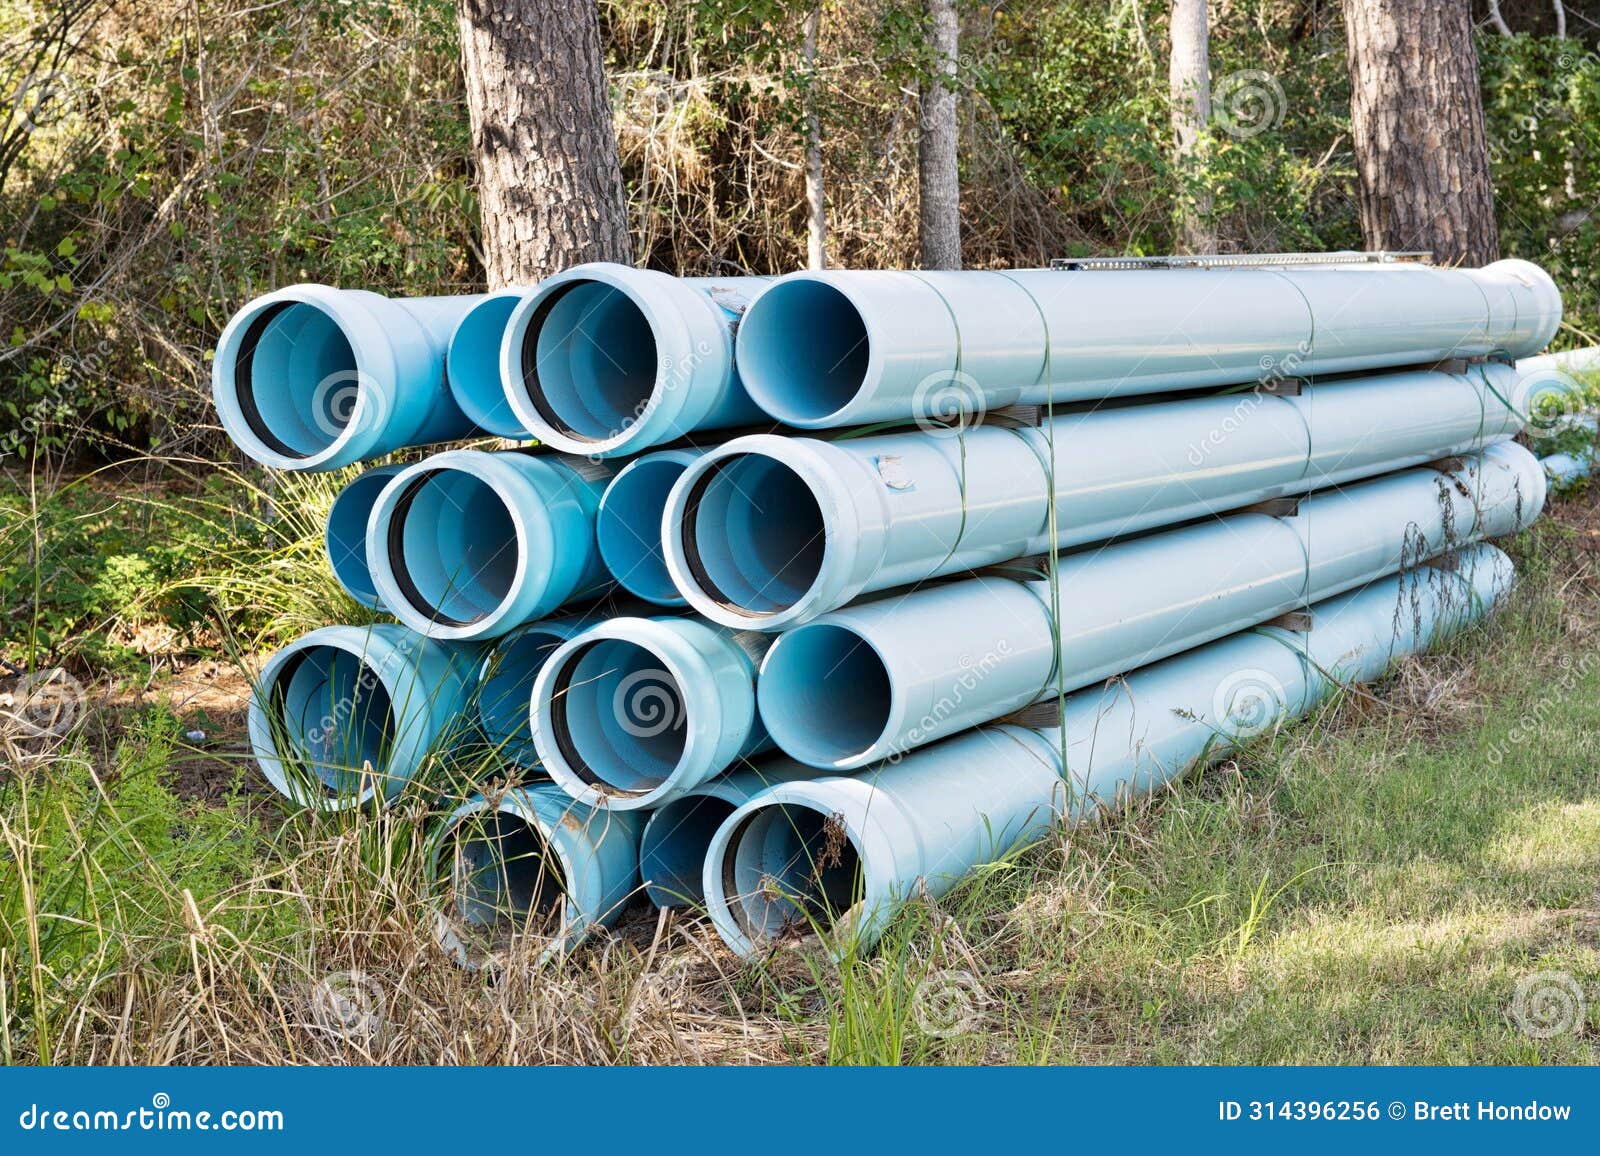 pvc pipes bundle for underground water mains construction.